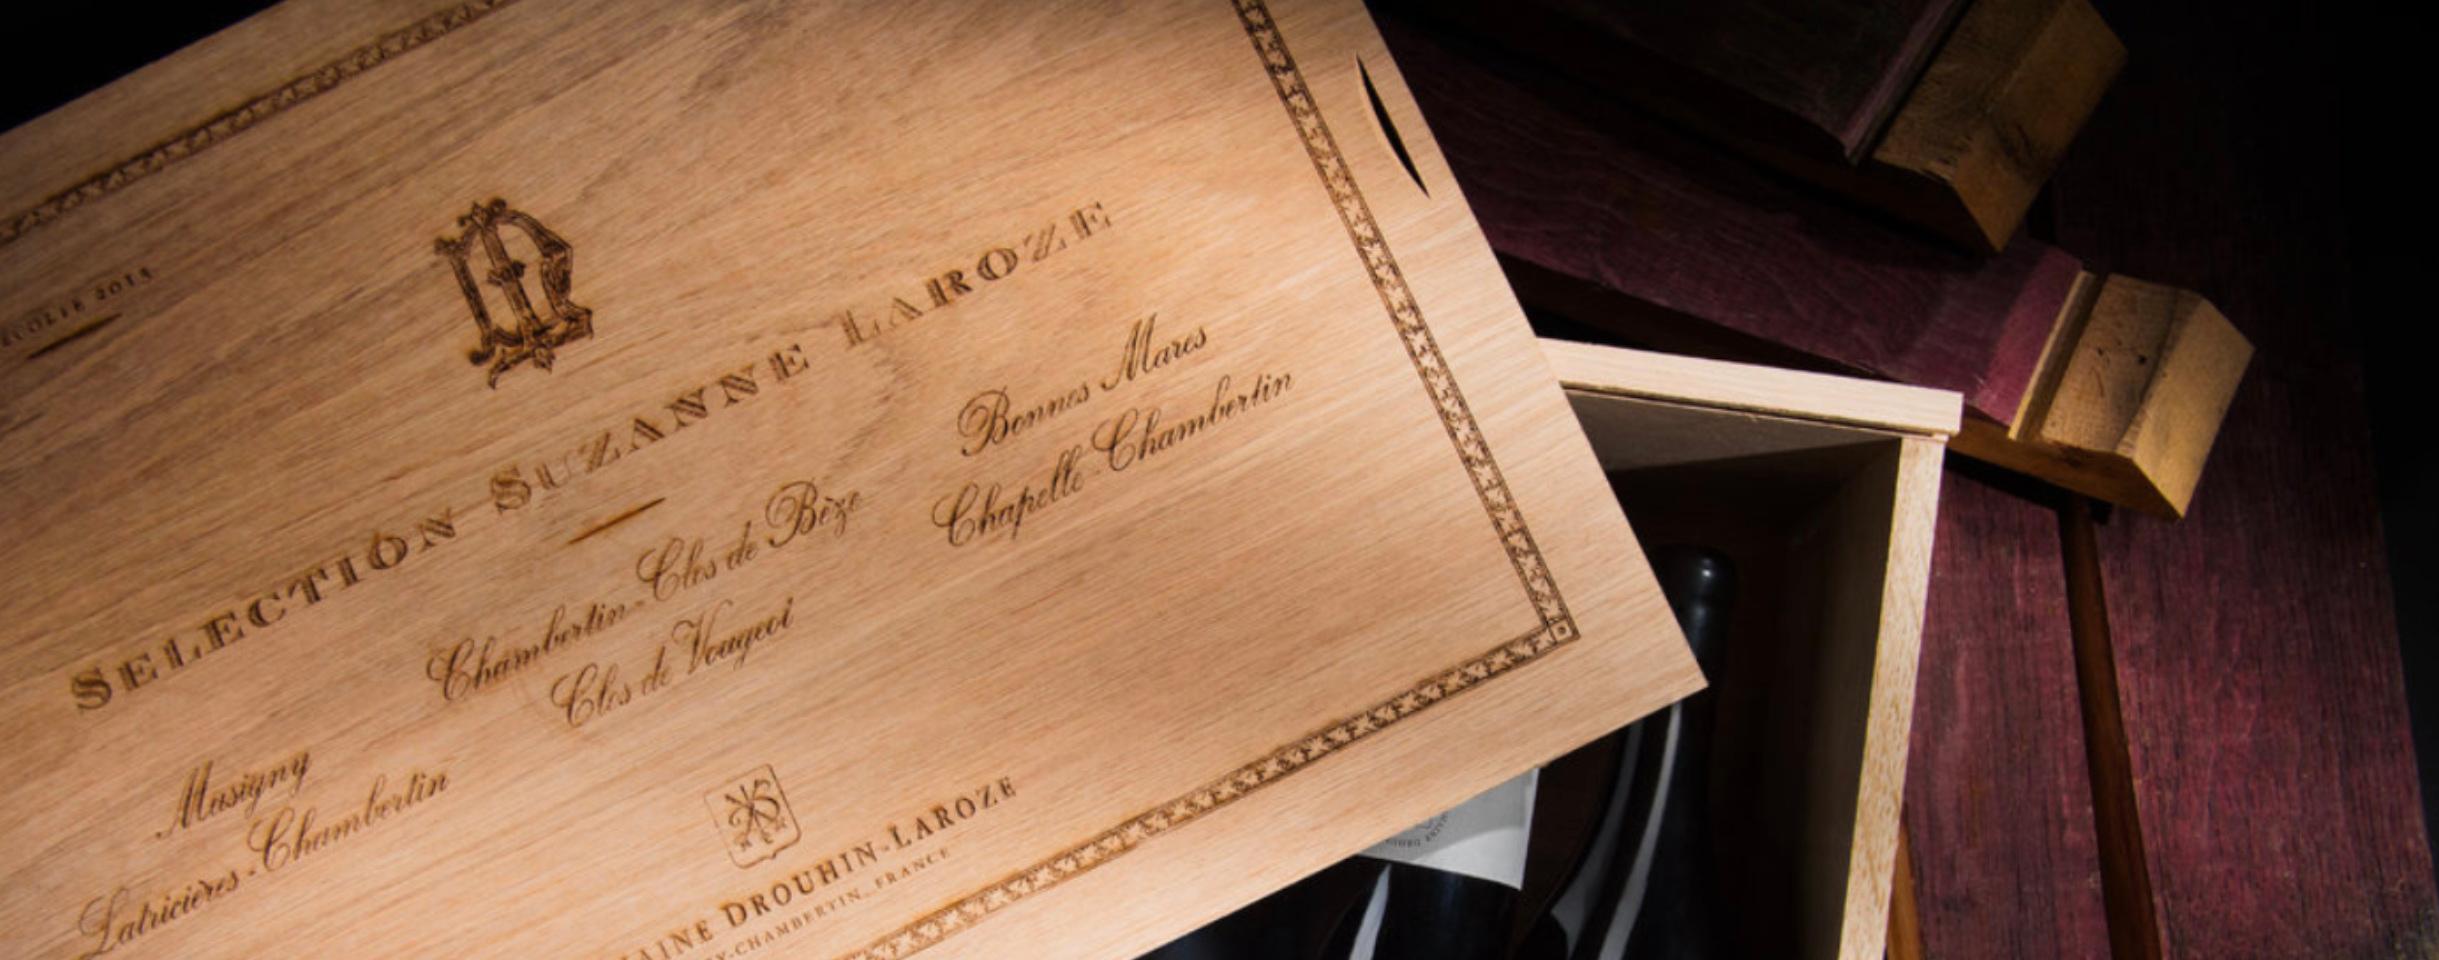 opened wooden box with wines inside